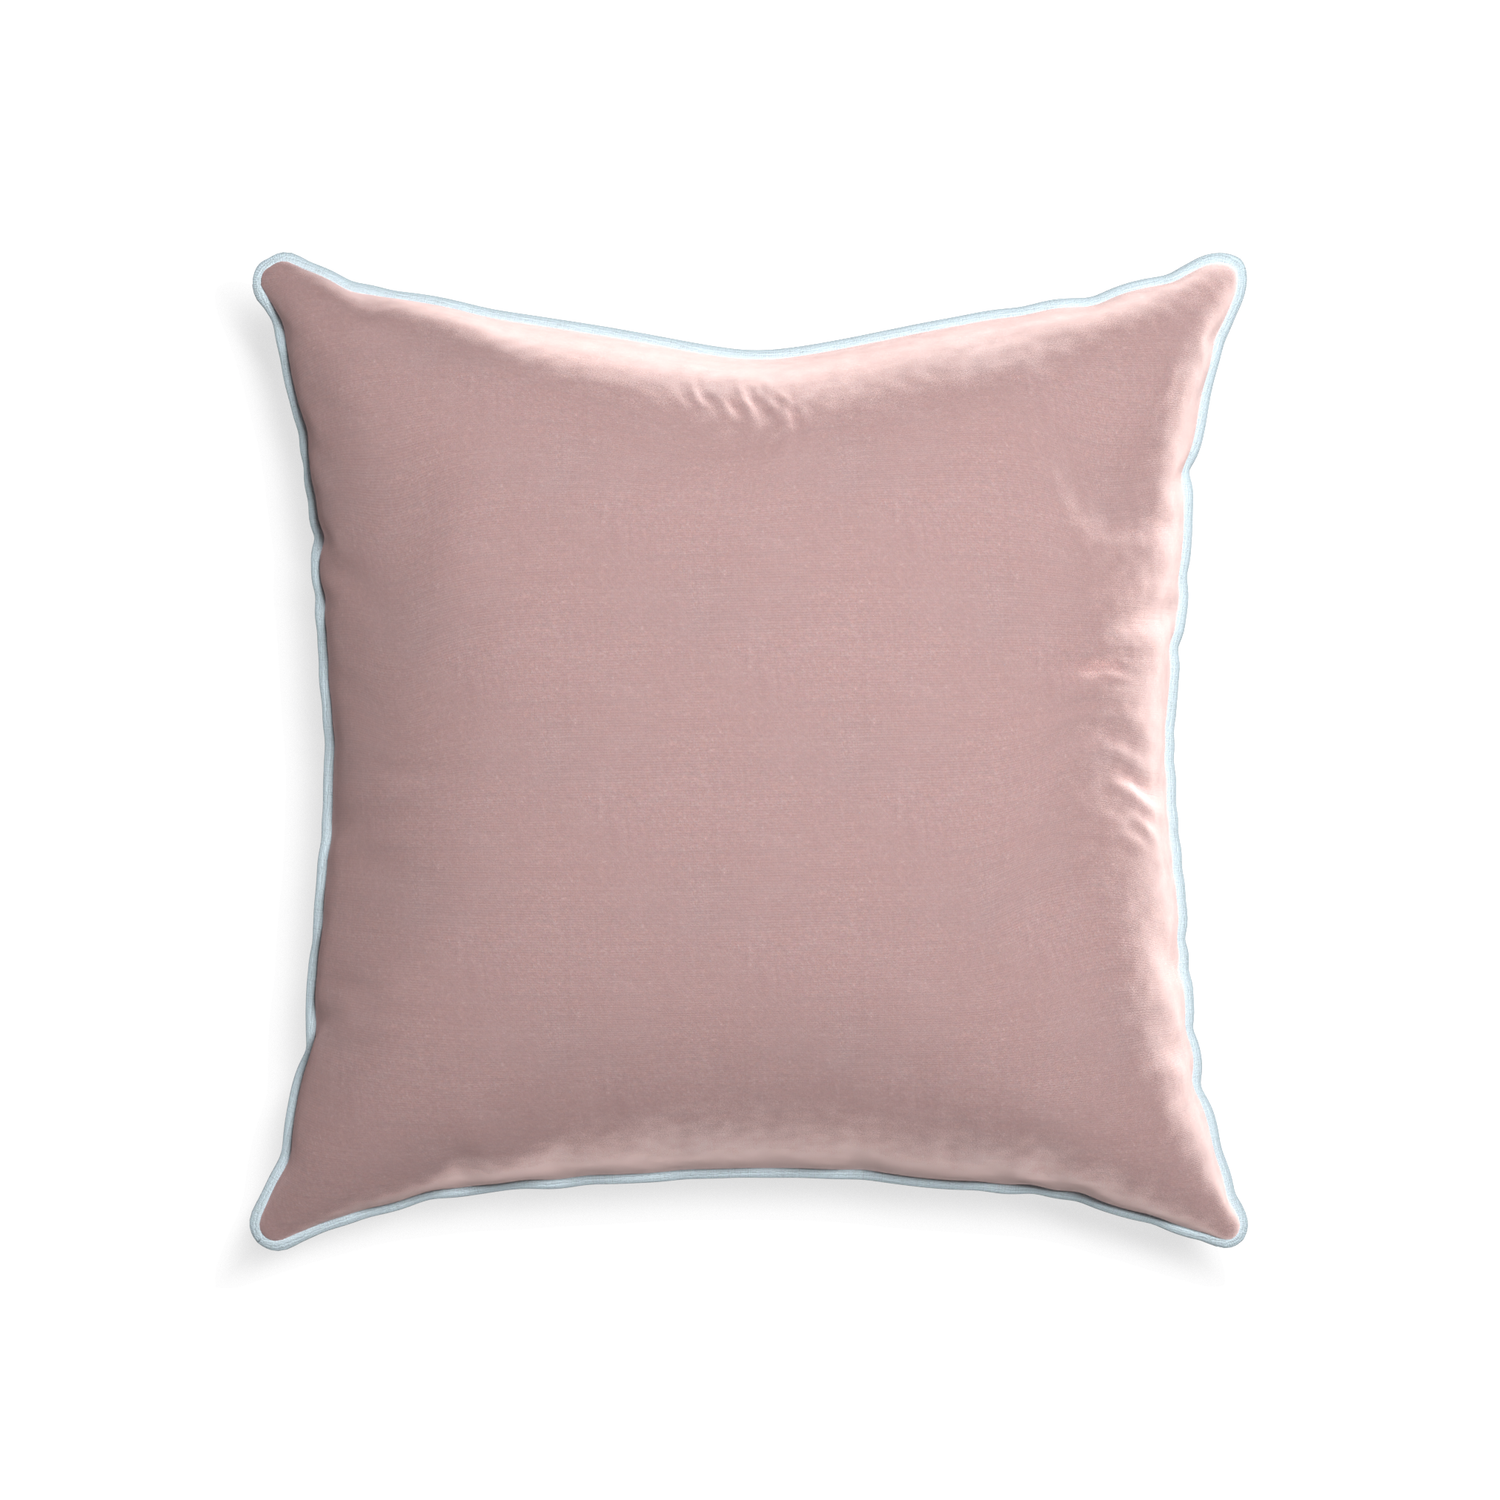 22-square mauve velvet custom pillow with powder piping on white background